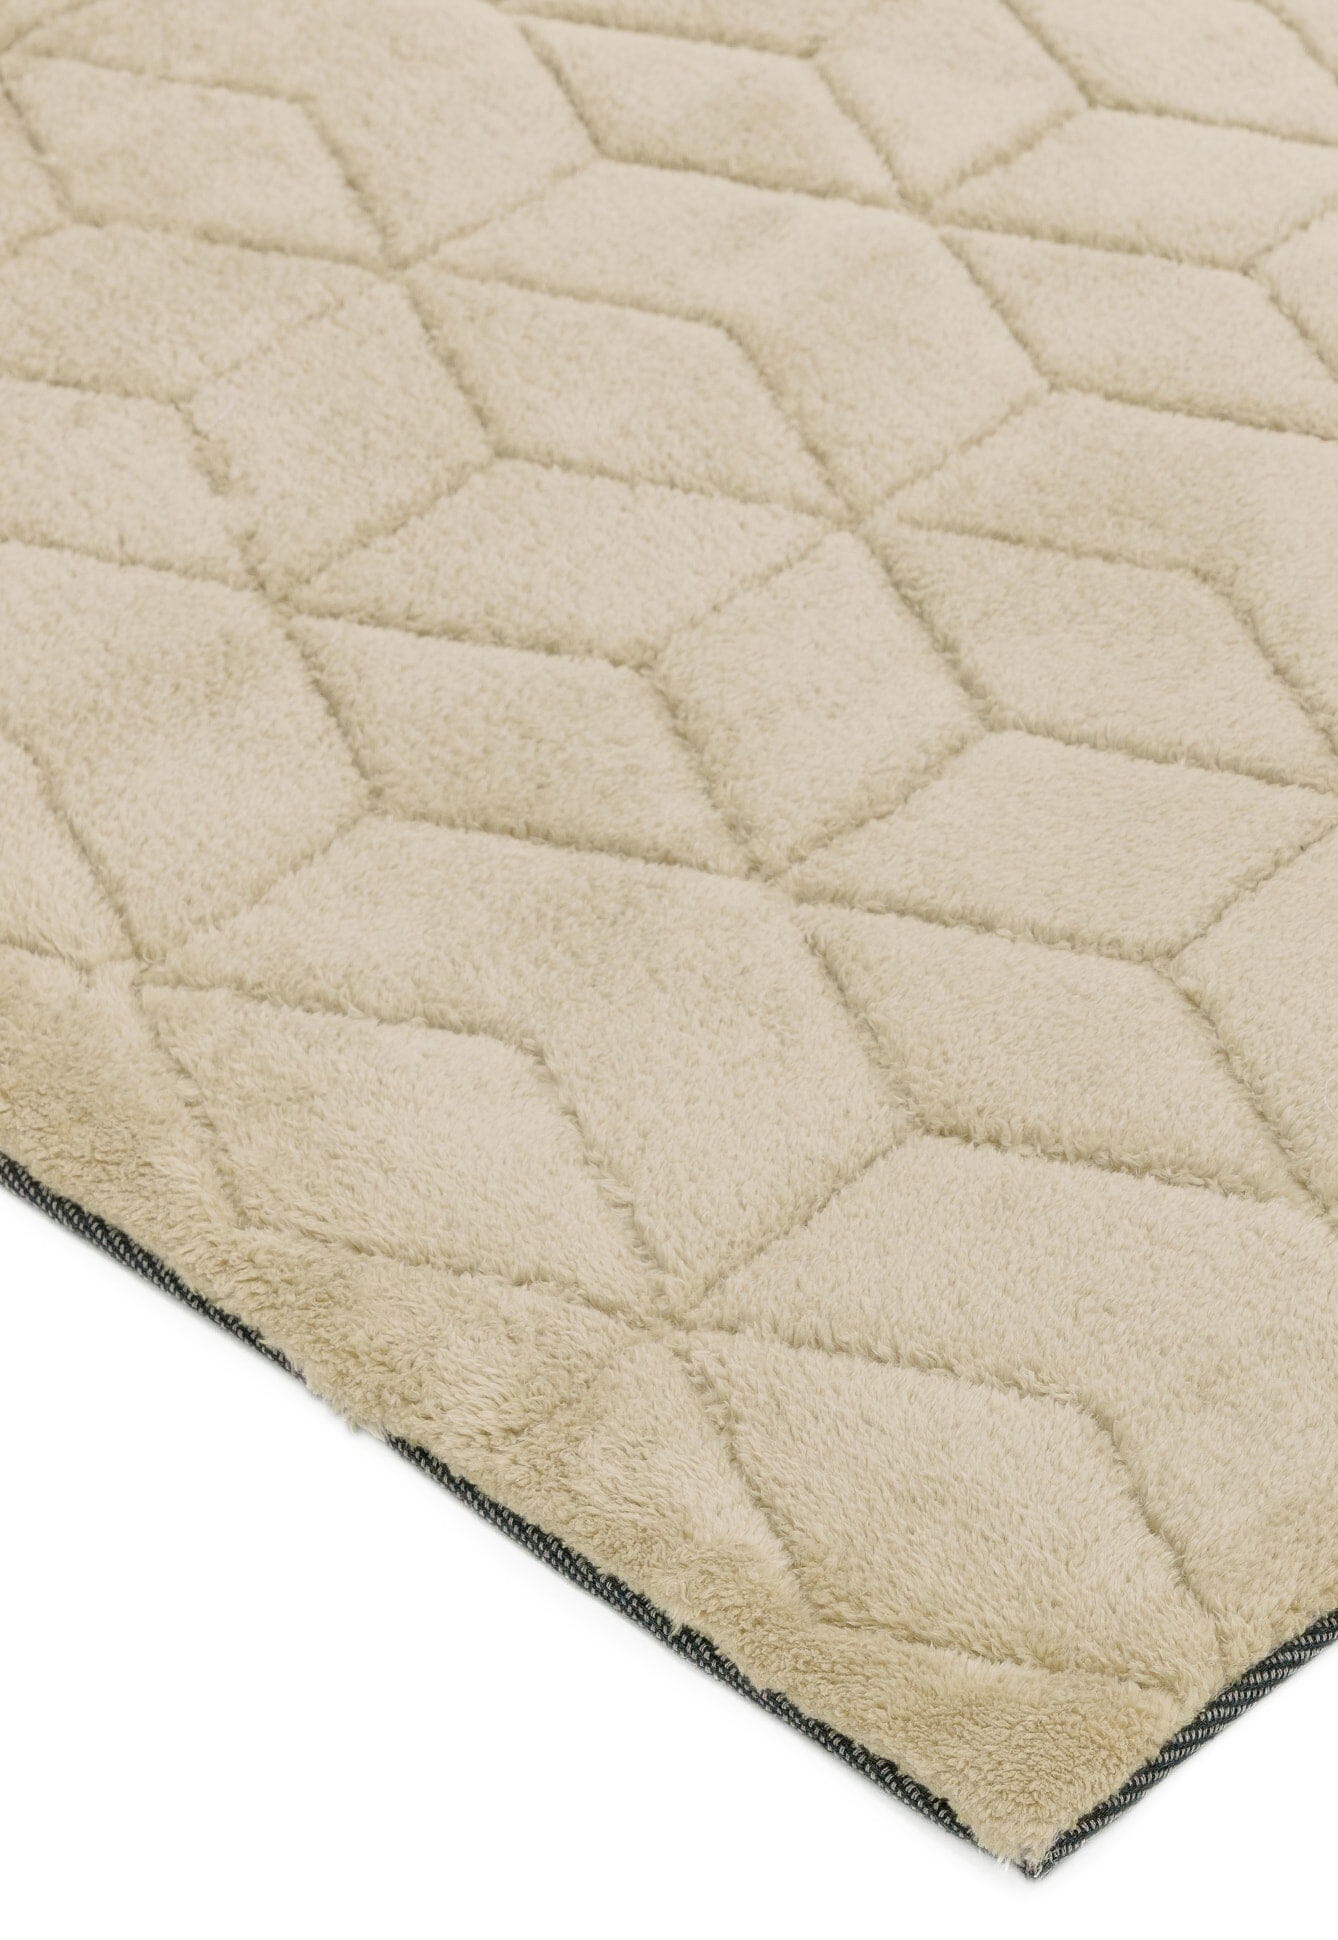 Asiatic Carpets Cozy knitted Rug Beige - 160 x 230cm